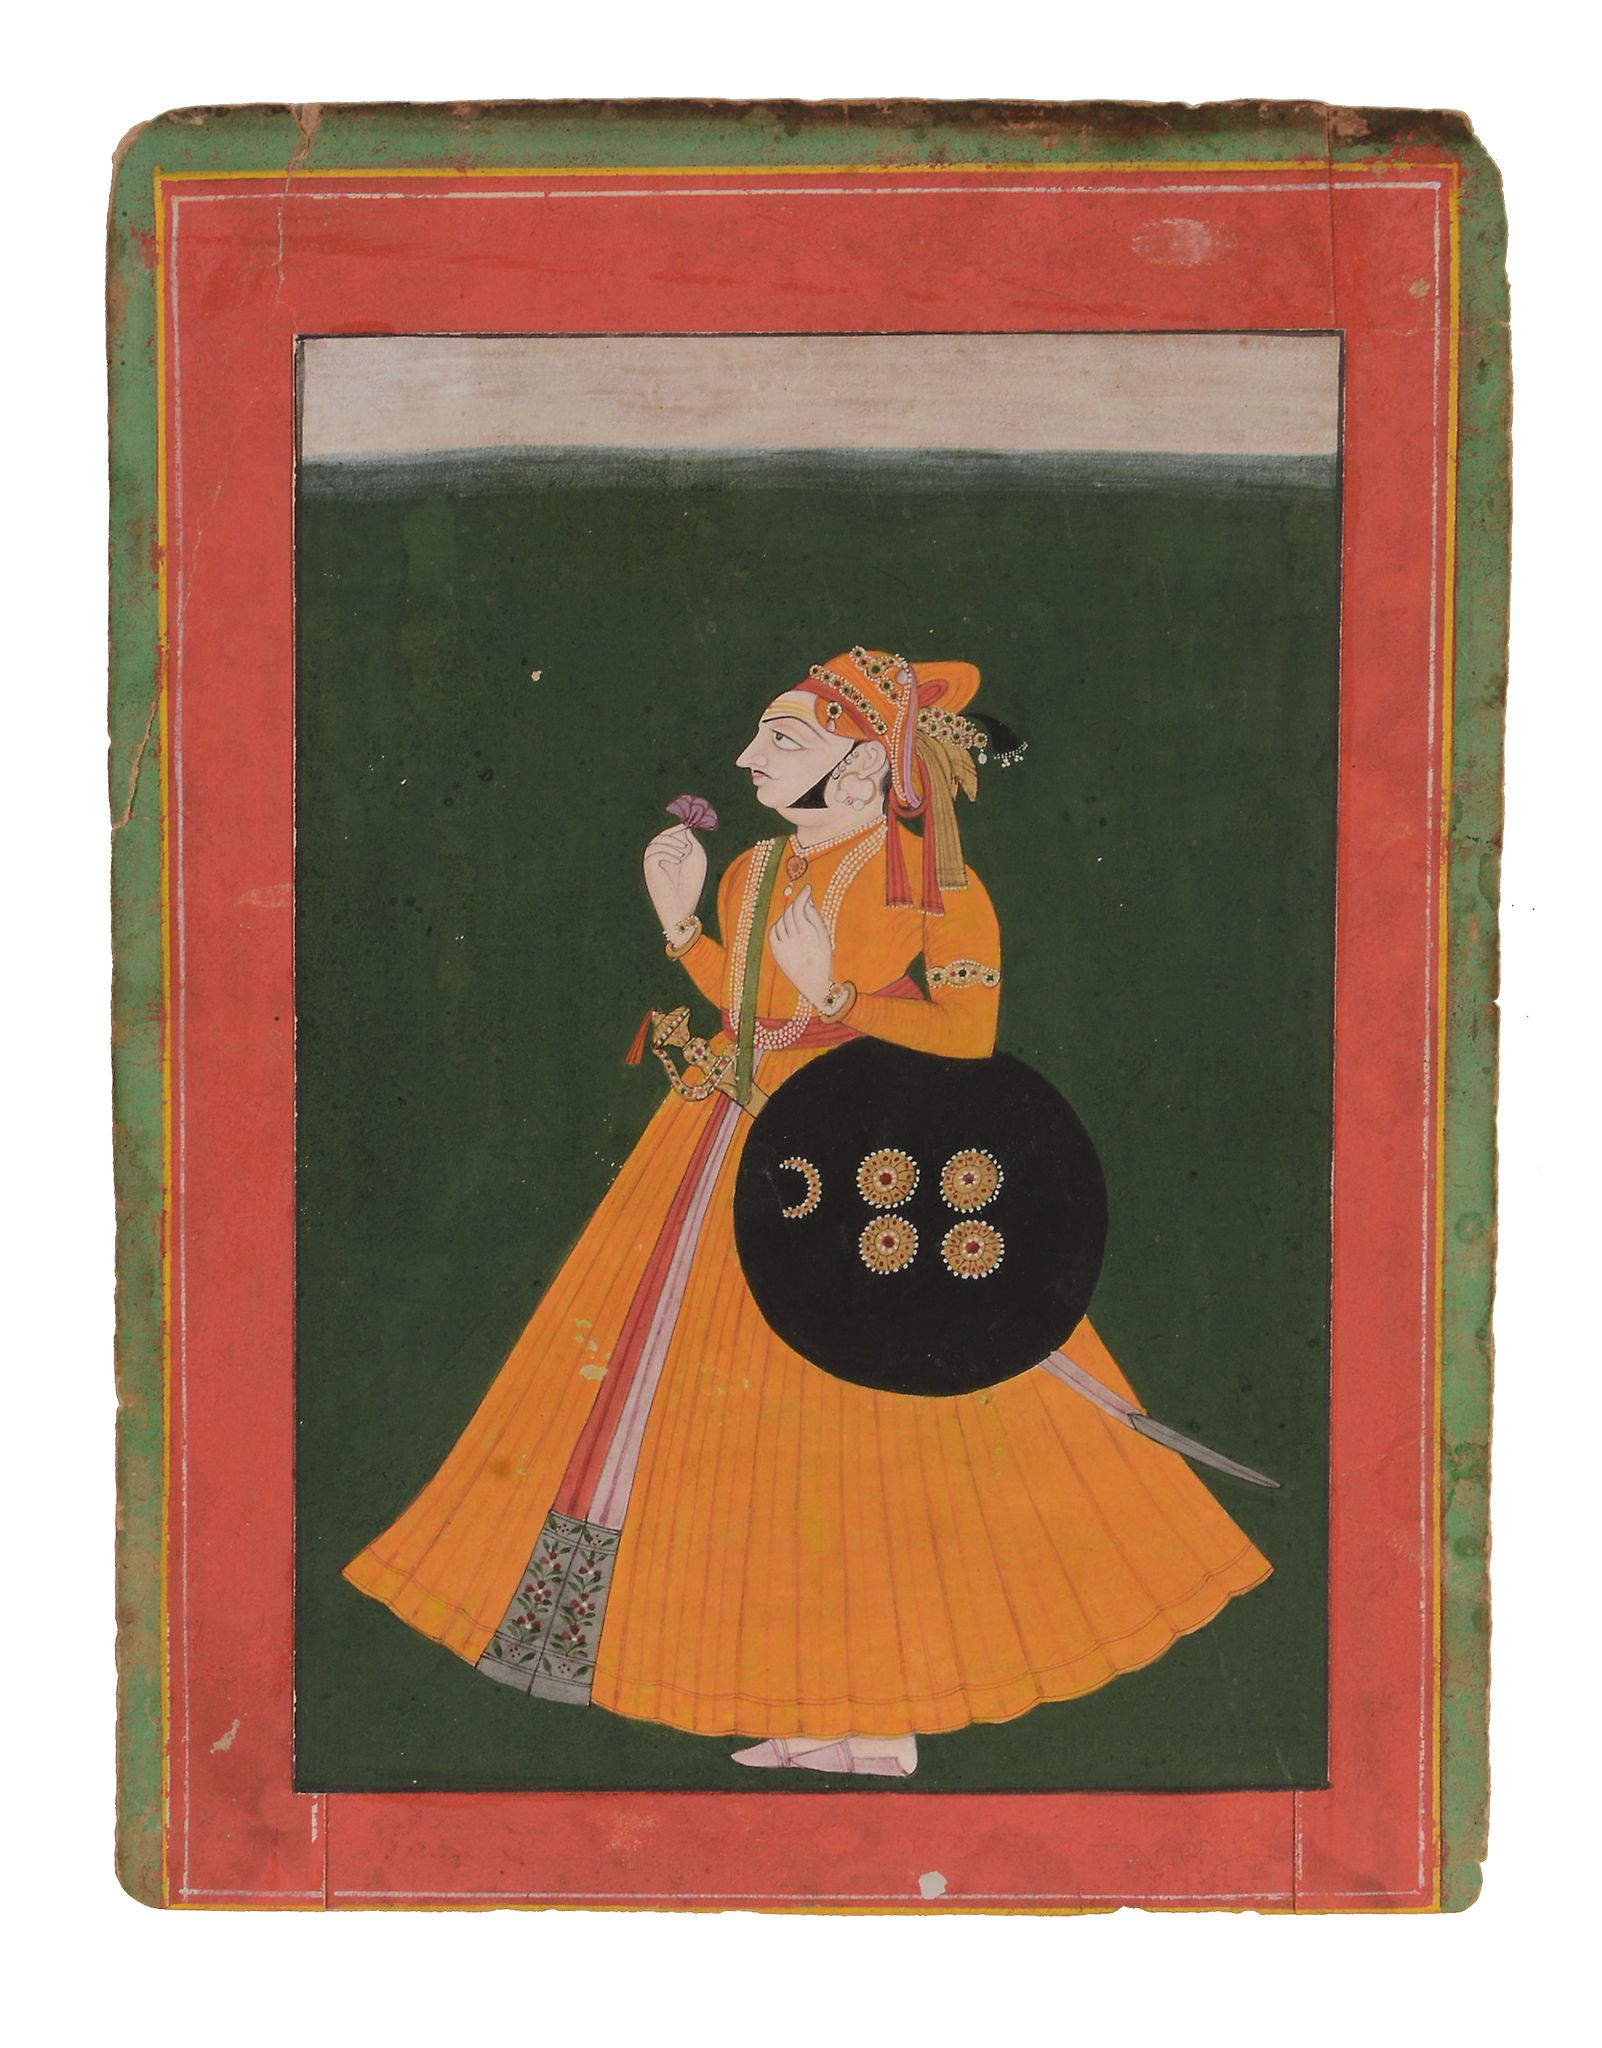 Three Indian portraits of rulers, Mewar, South Western Rajasthan, late 18th or 19th century, each